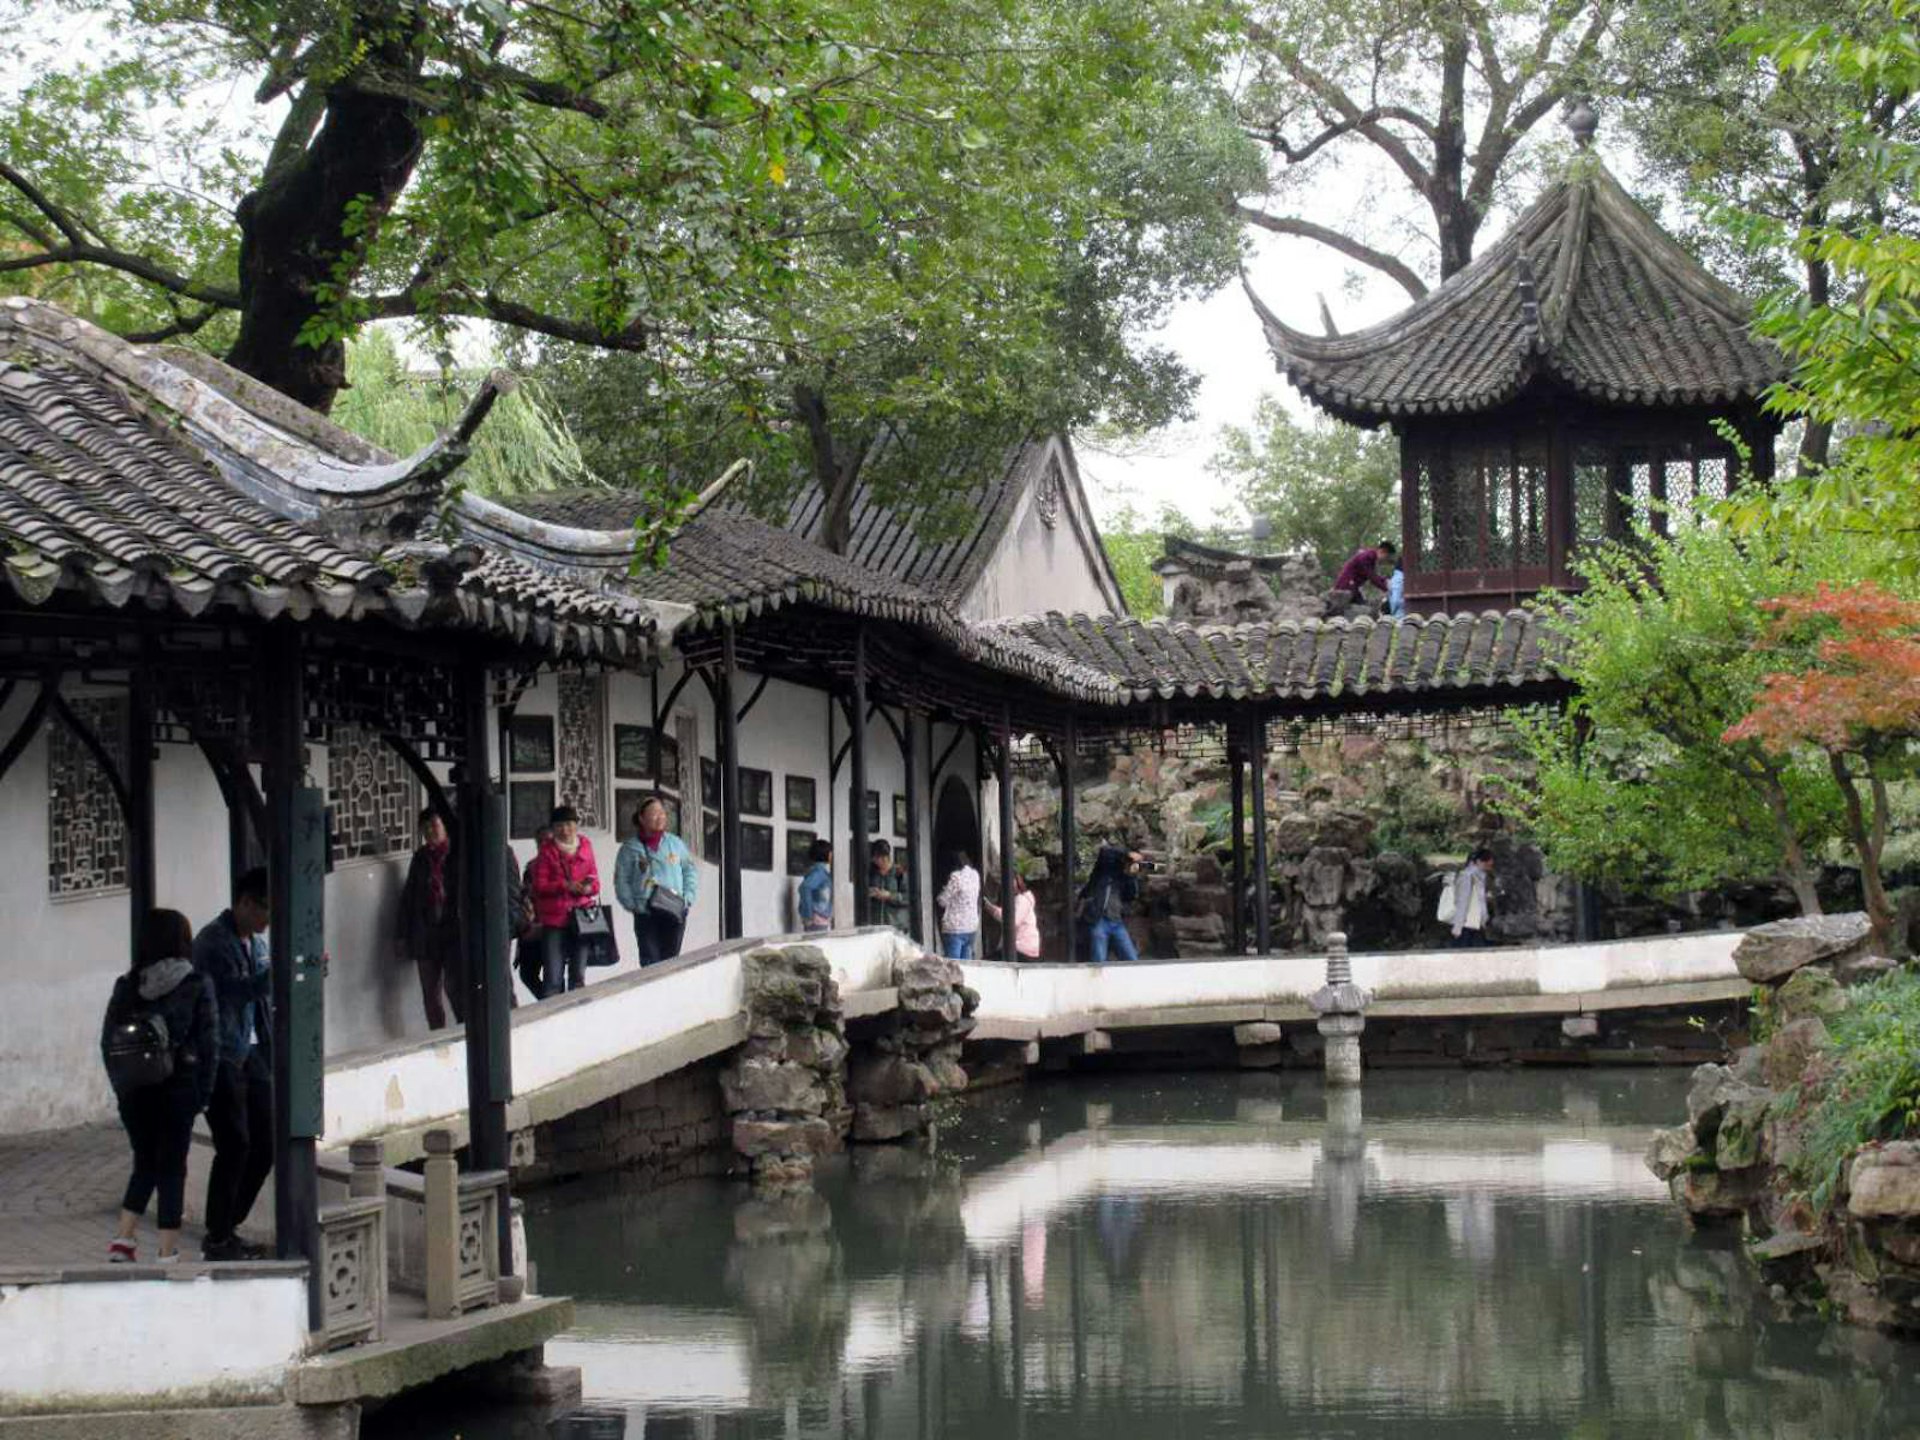 A covered walkway with upturned eaves next to a pond with Chinese pavilion in the background. Suzhou's gardens were first cultivated as private residences © Tess Humphrys / Lonely Planet